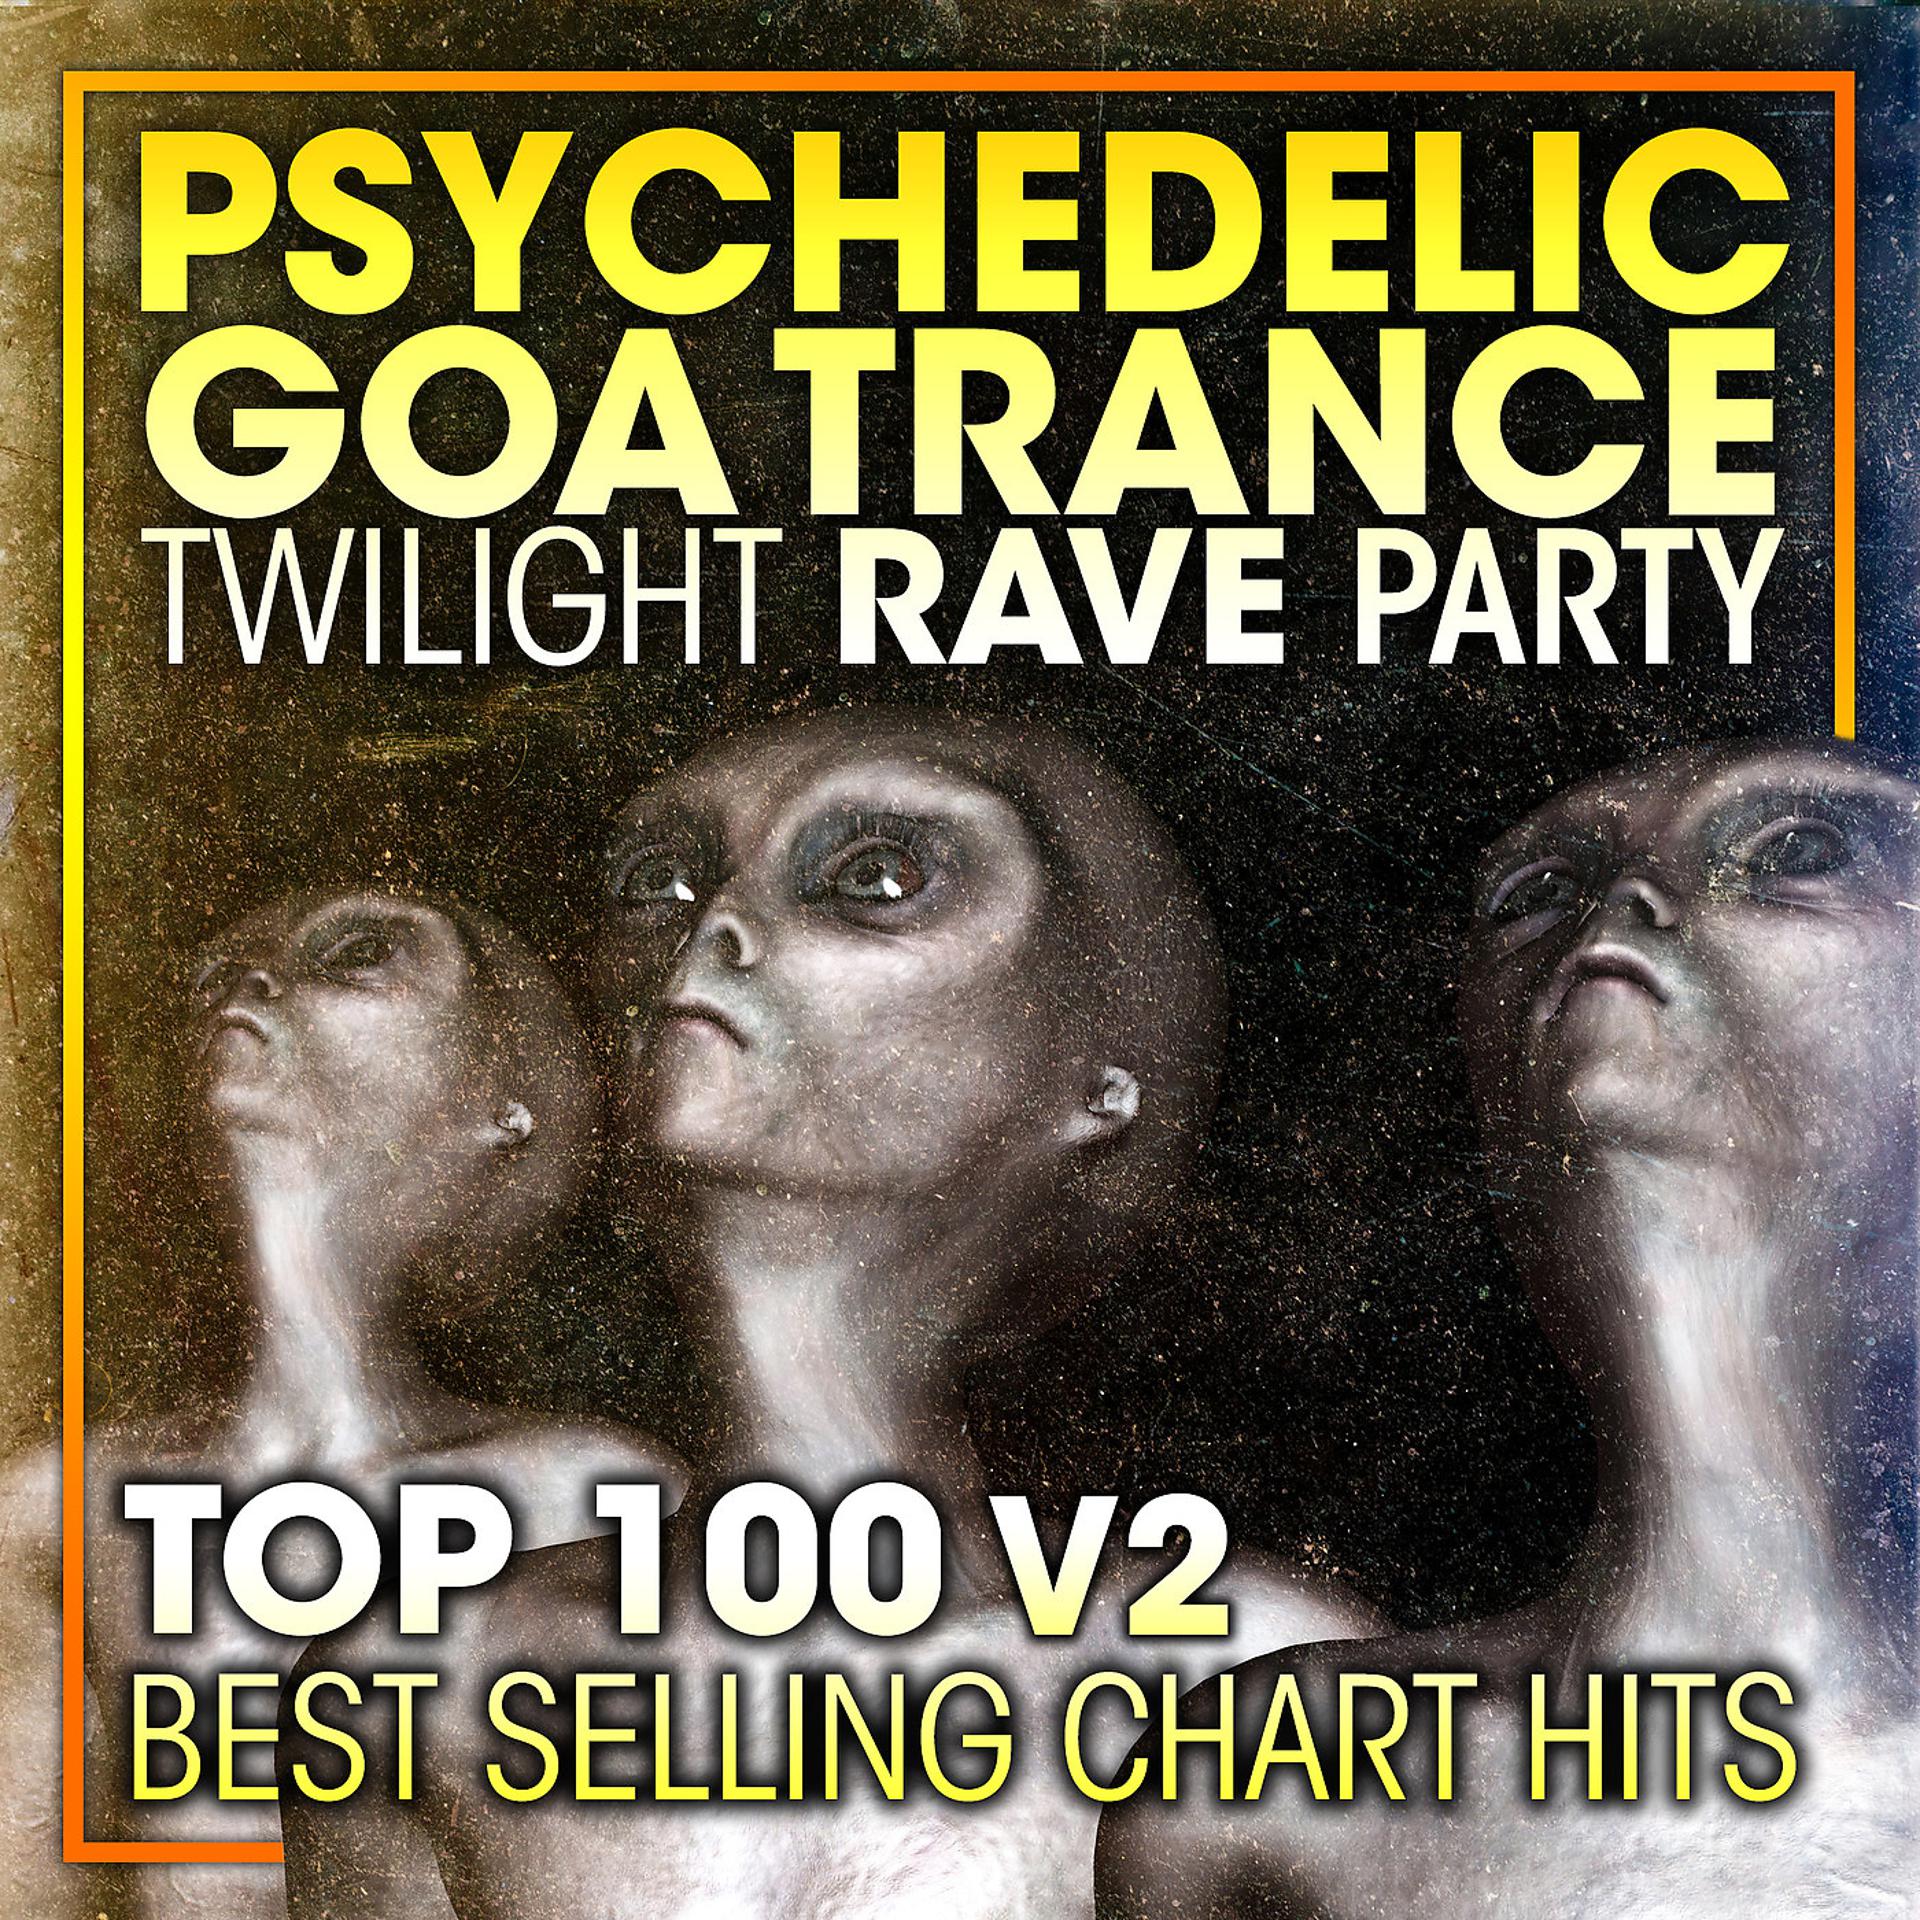 Постер альбома Psychedelic Goa Trance Twilight Rave Party Top 100 Best Selling Chart Hits V2